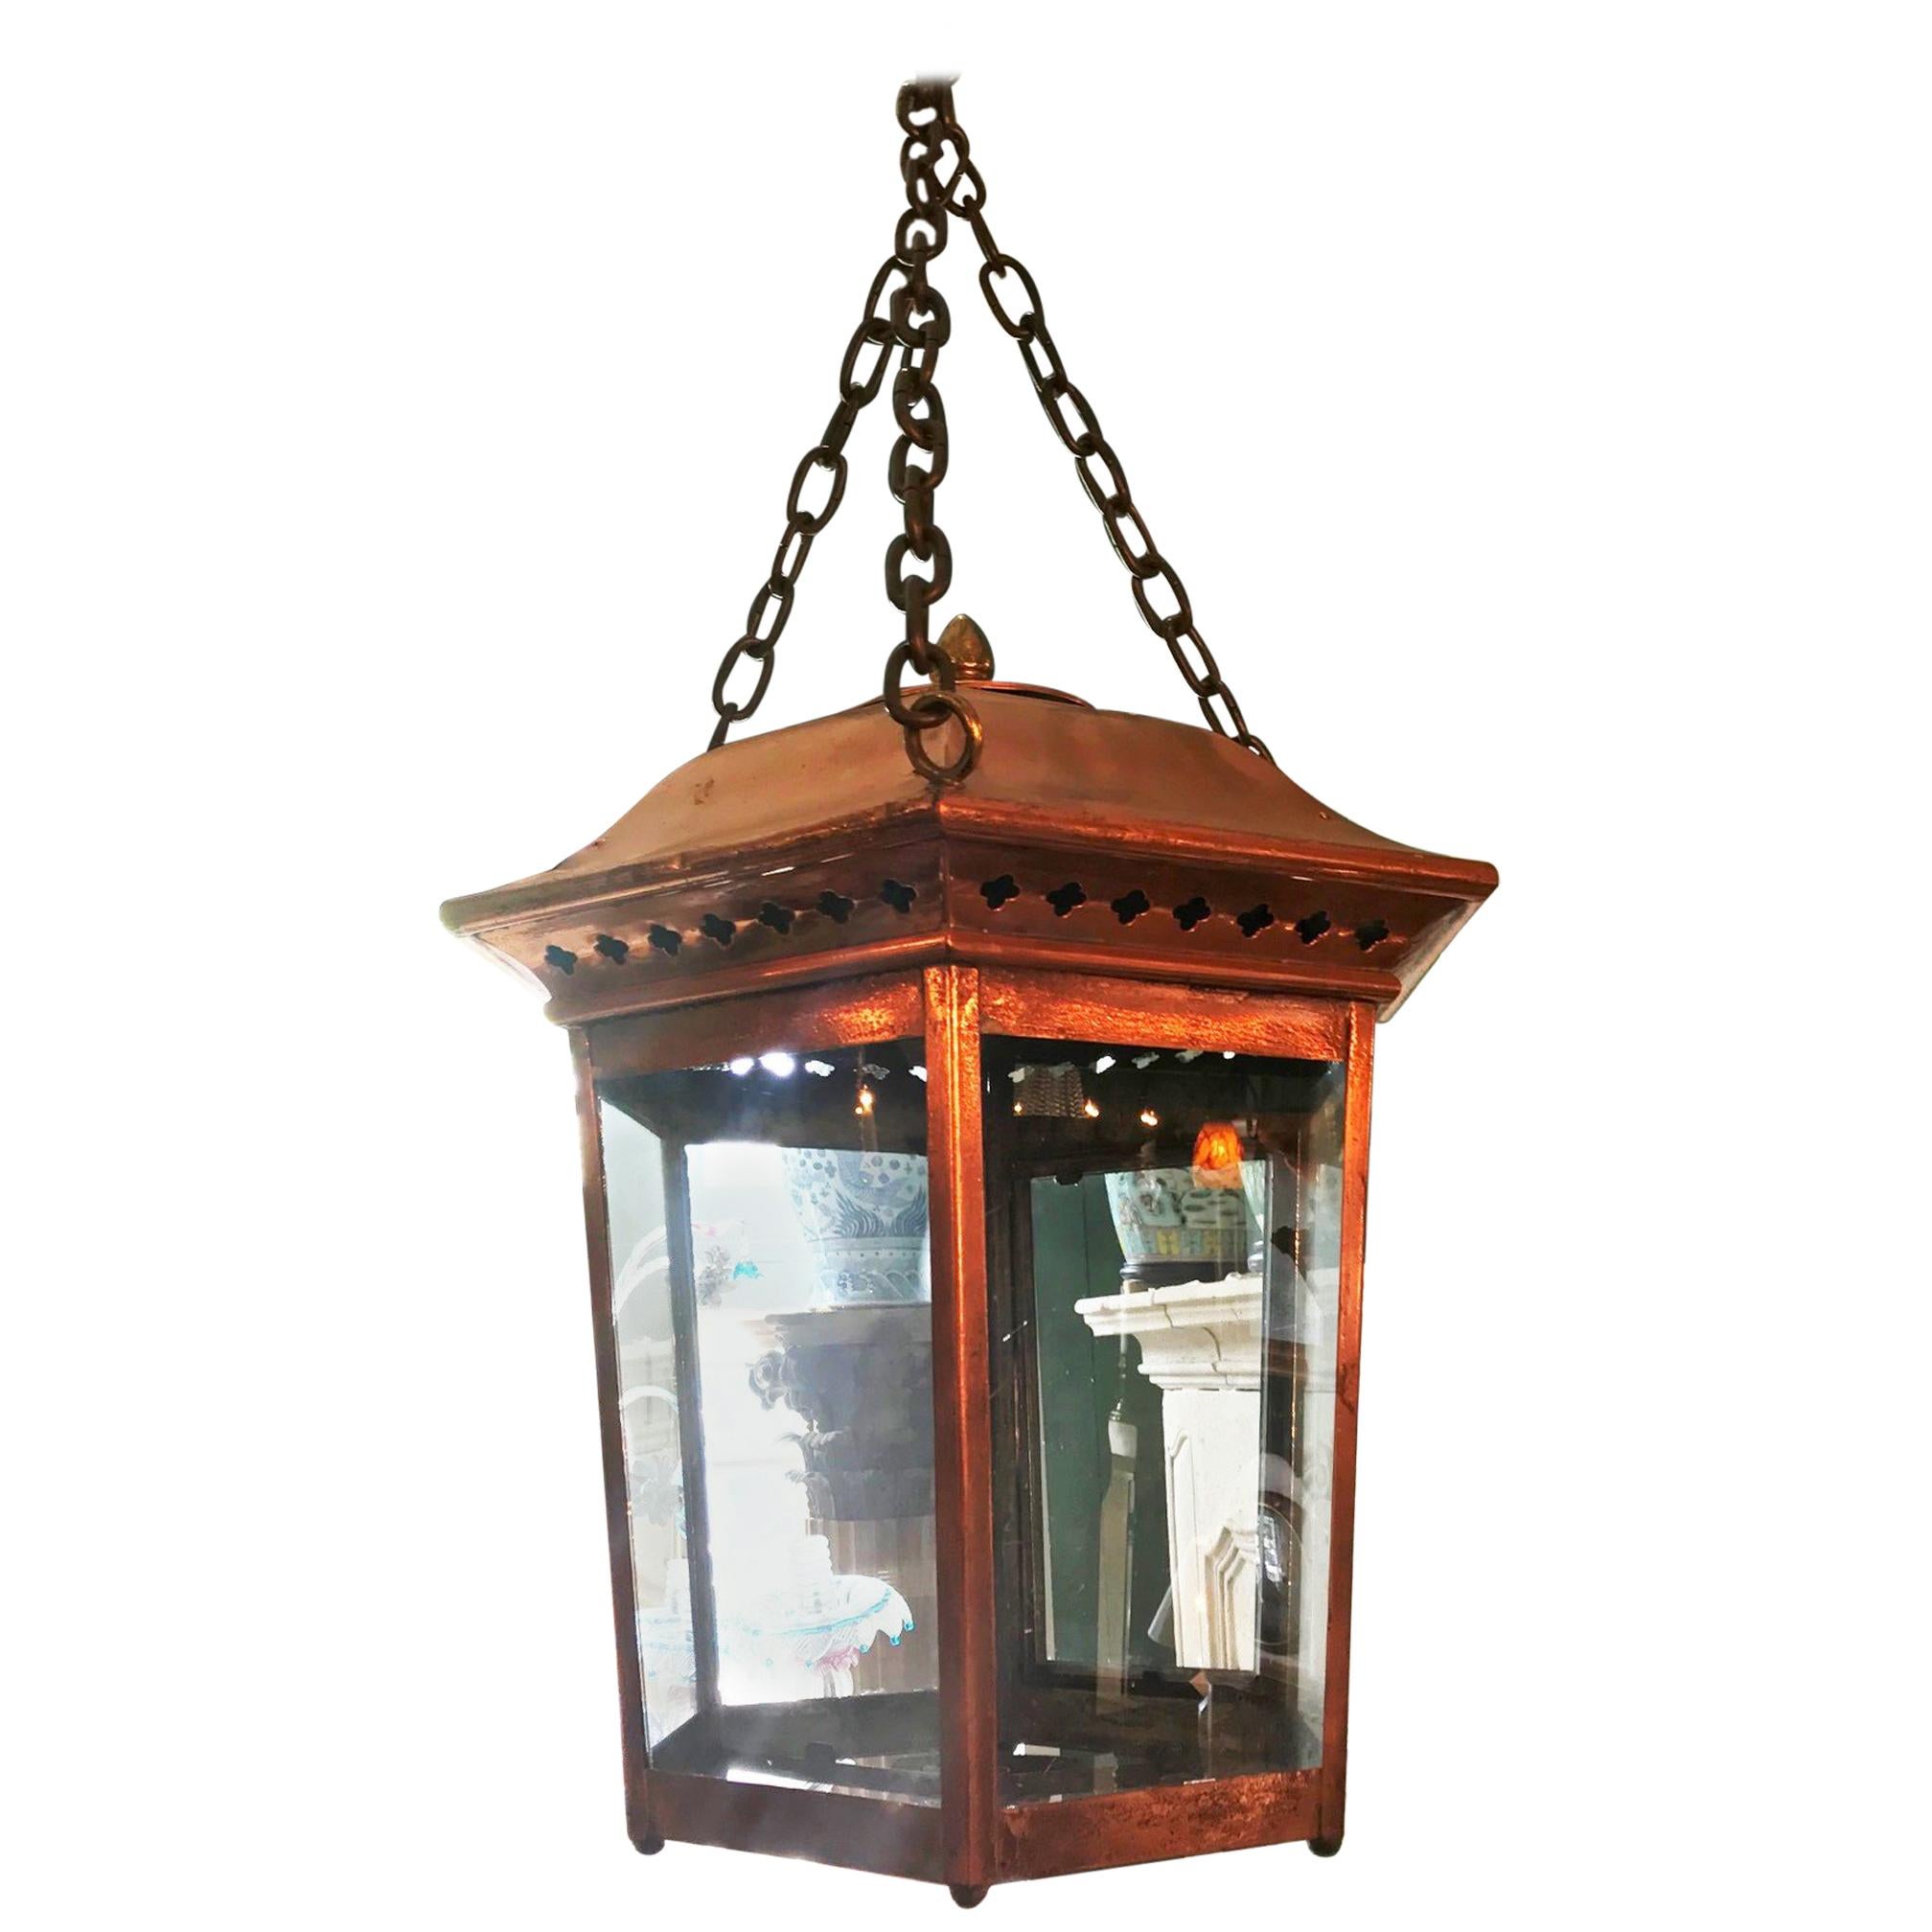 Old Rustic Copper Hanging Ceiling Light Lantern Pendant Antique hand made period